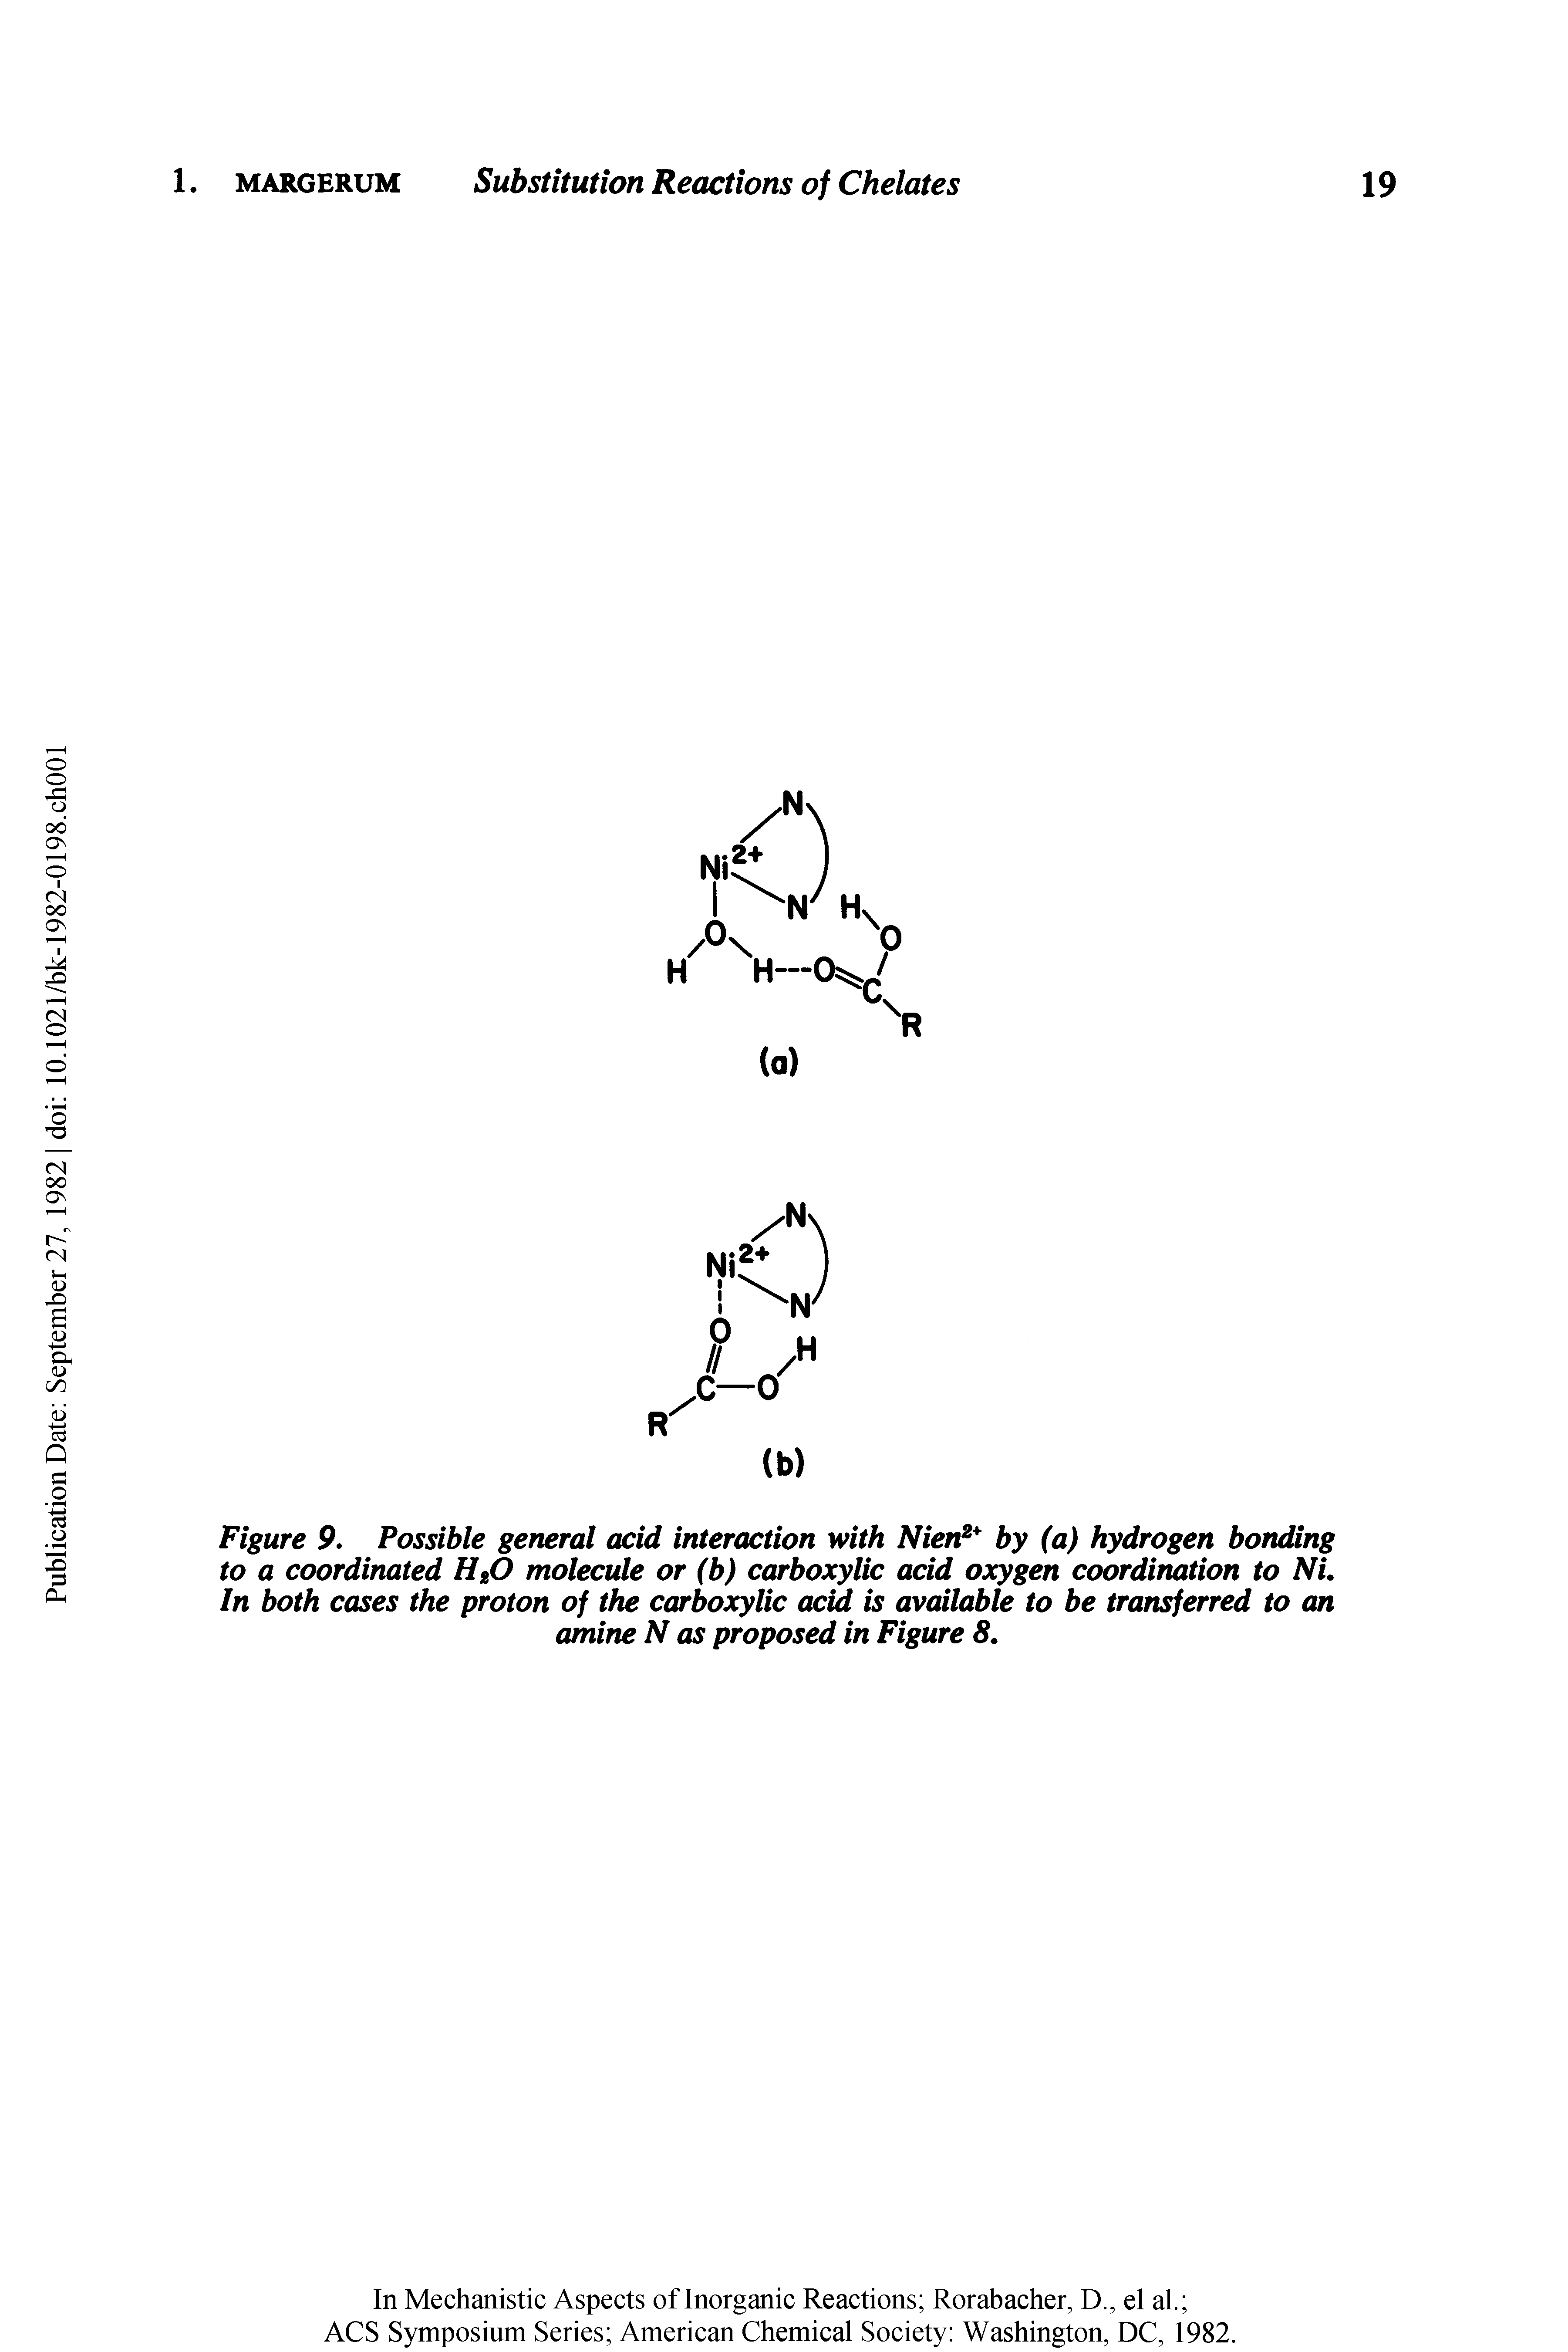 Figure 9. Possible general acid interaction with Nien2 by (a) hydrogen bonding to a coordinated H20 molecule or (b) carboxylic acid oxygen coordination to Ni. In both cases the proton of the carboxylic add is available to be transferred to an amine N as proposed in Figure 8.